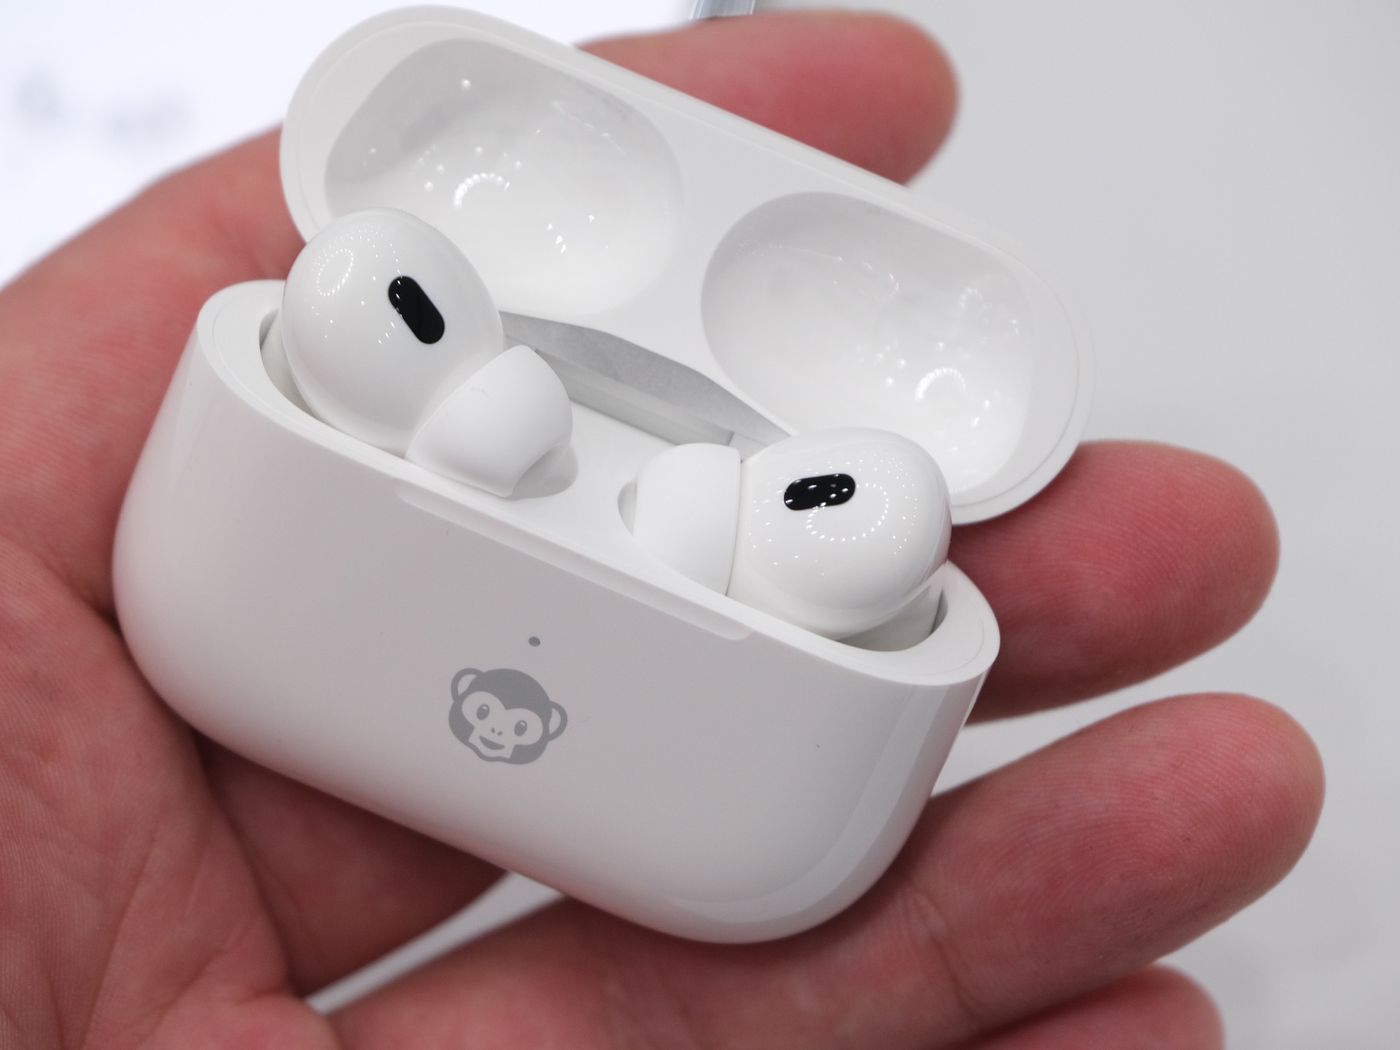 Apple's new AirPods Pro hands-on: sticking close to a winning 